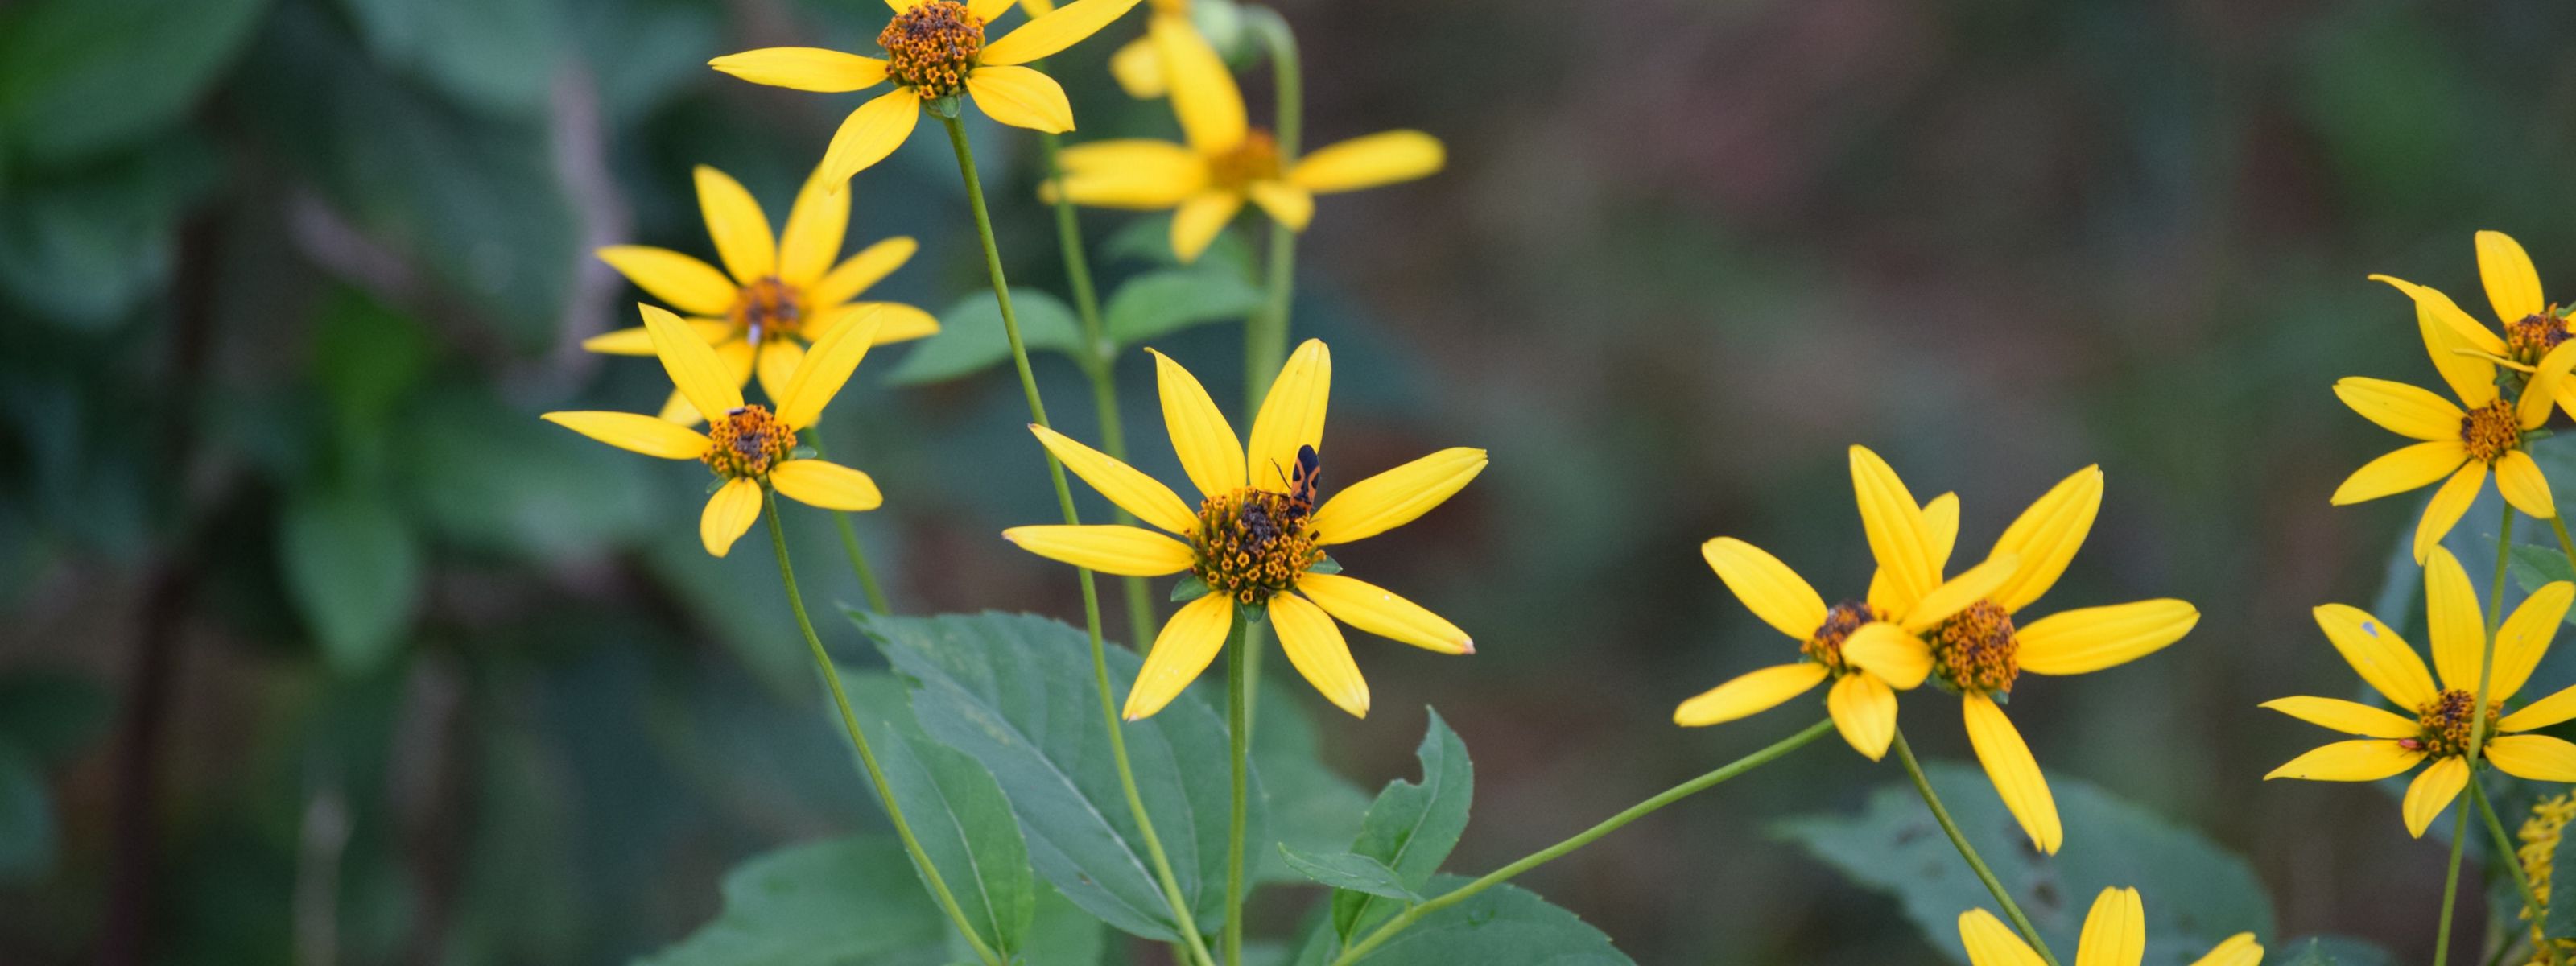 Closeup of yellow flowers with long, thin petals.